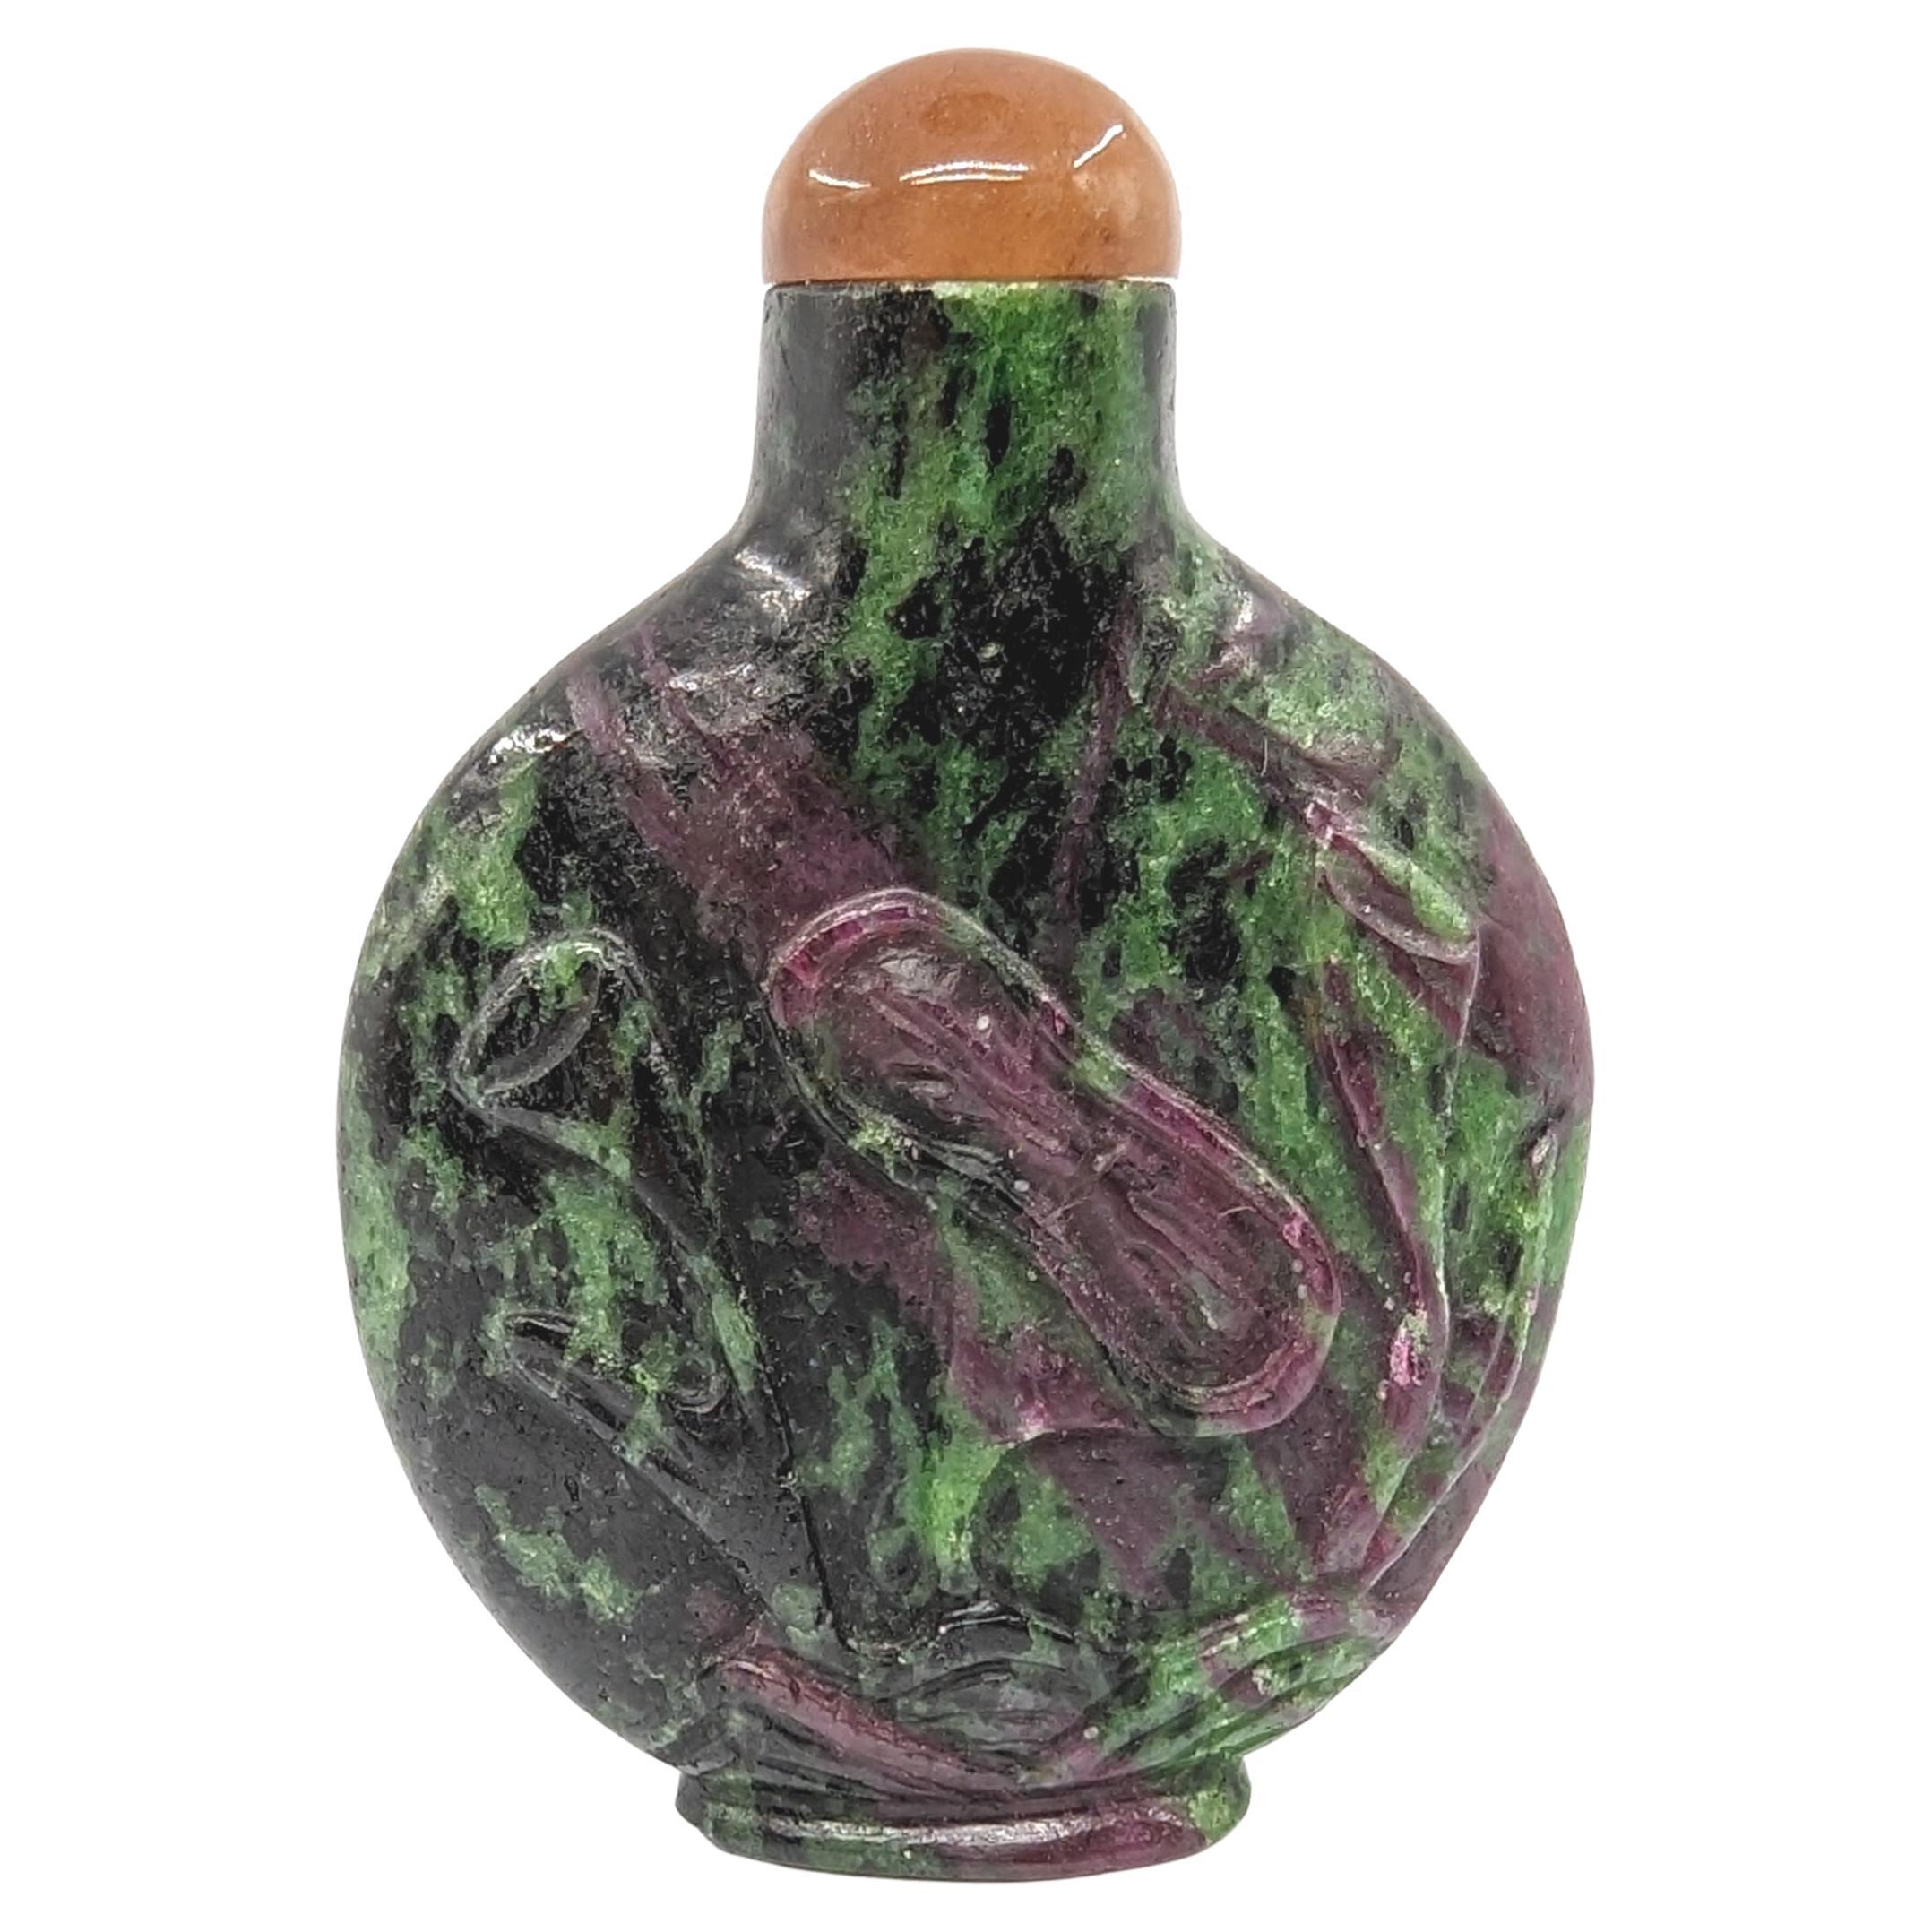 Antique Chinese carved ruby in zoisite hardstone snuff bottle, with carved lotus in relief accentuating the purple ruby in the material, raised on carved foot-ring, with a rounded agate stopper and red bone spoon

Early 20th century Republic period